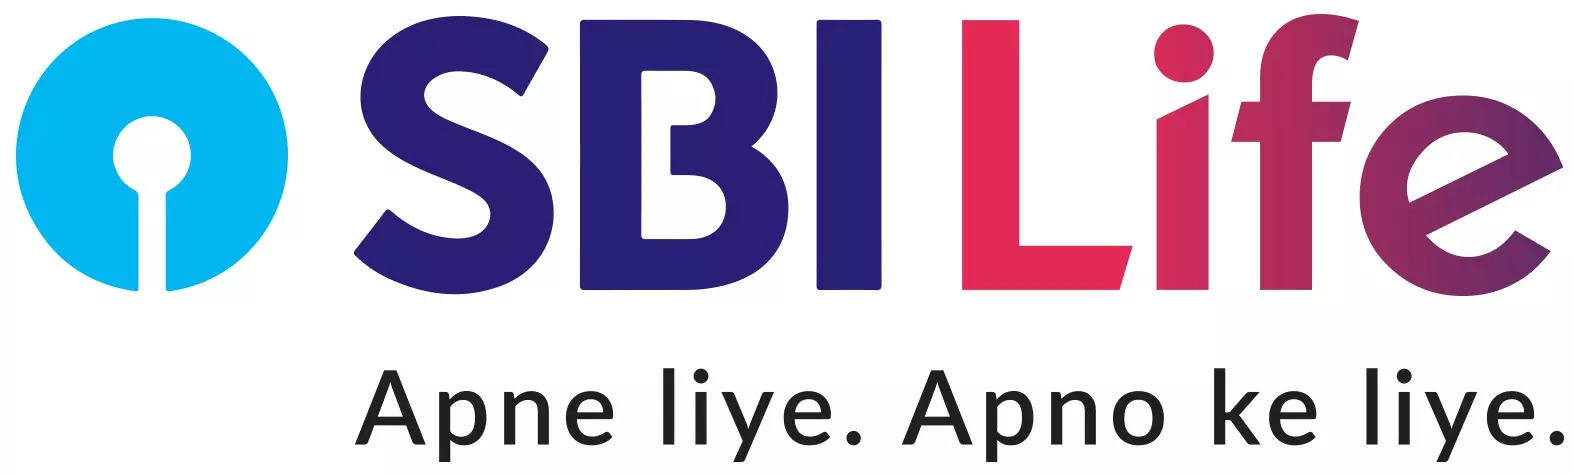 SBI Life Insurance Company Share Price Today Live Updates: SBI Life Insurance Closes at Rs 1529.4 with 6-Month Beta of 0.6731 